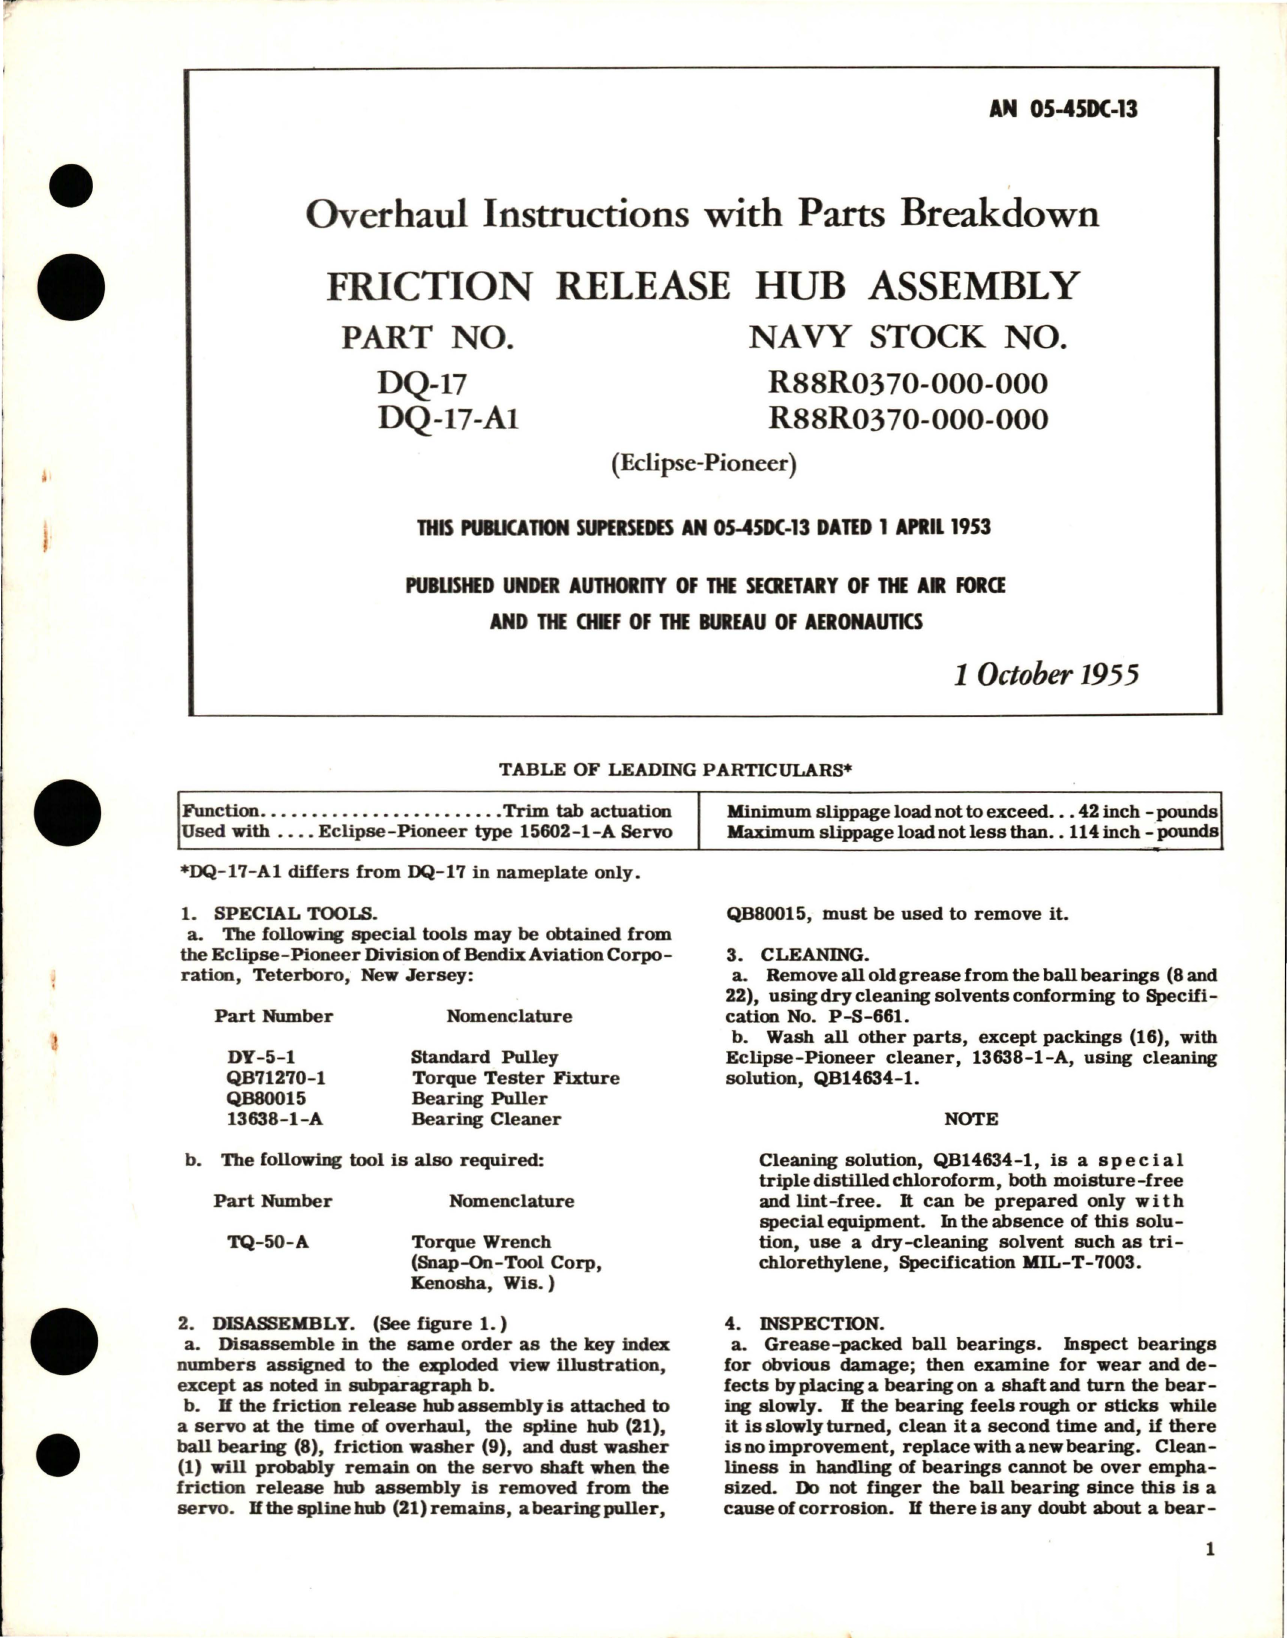 Sample page 1 from AirCorps Library document: Overhaul Instructions with Parts for Friction Release Hub Assembly - Parts DQ-17, DQ-17-A1 